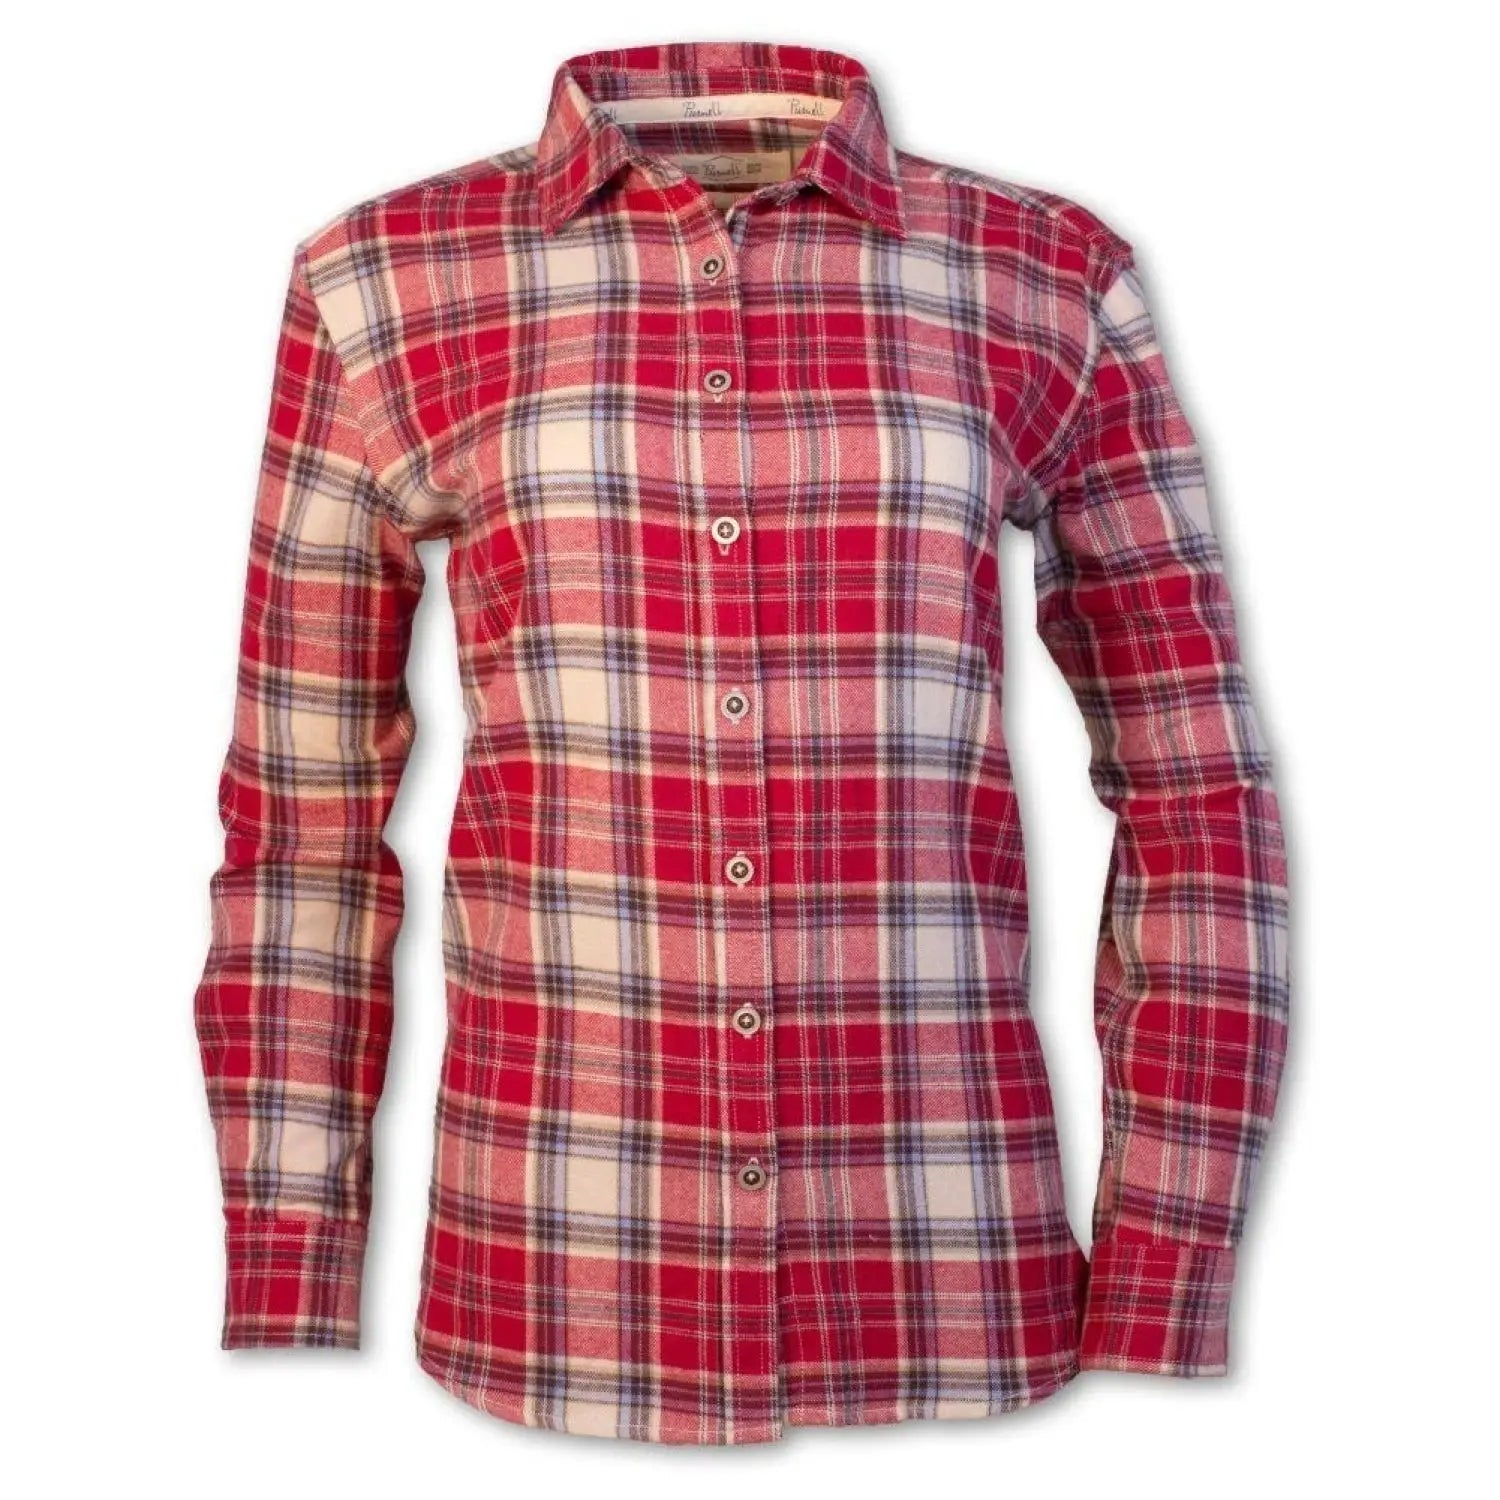 Purnell Women's Red Plaid Flannel. Front view.